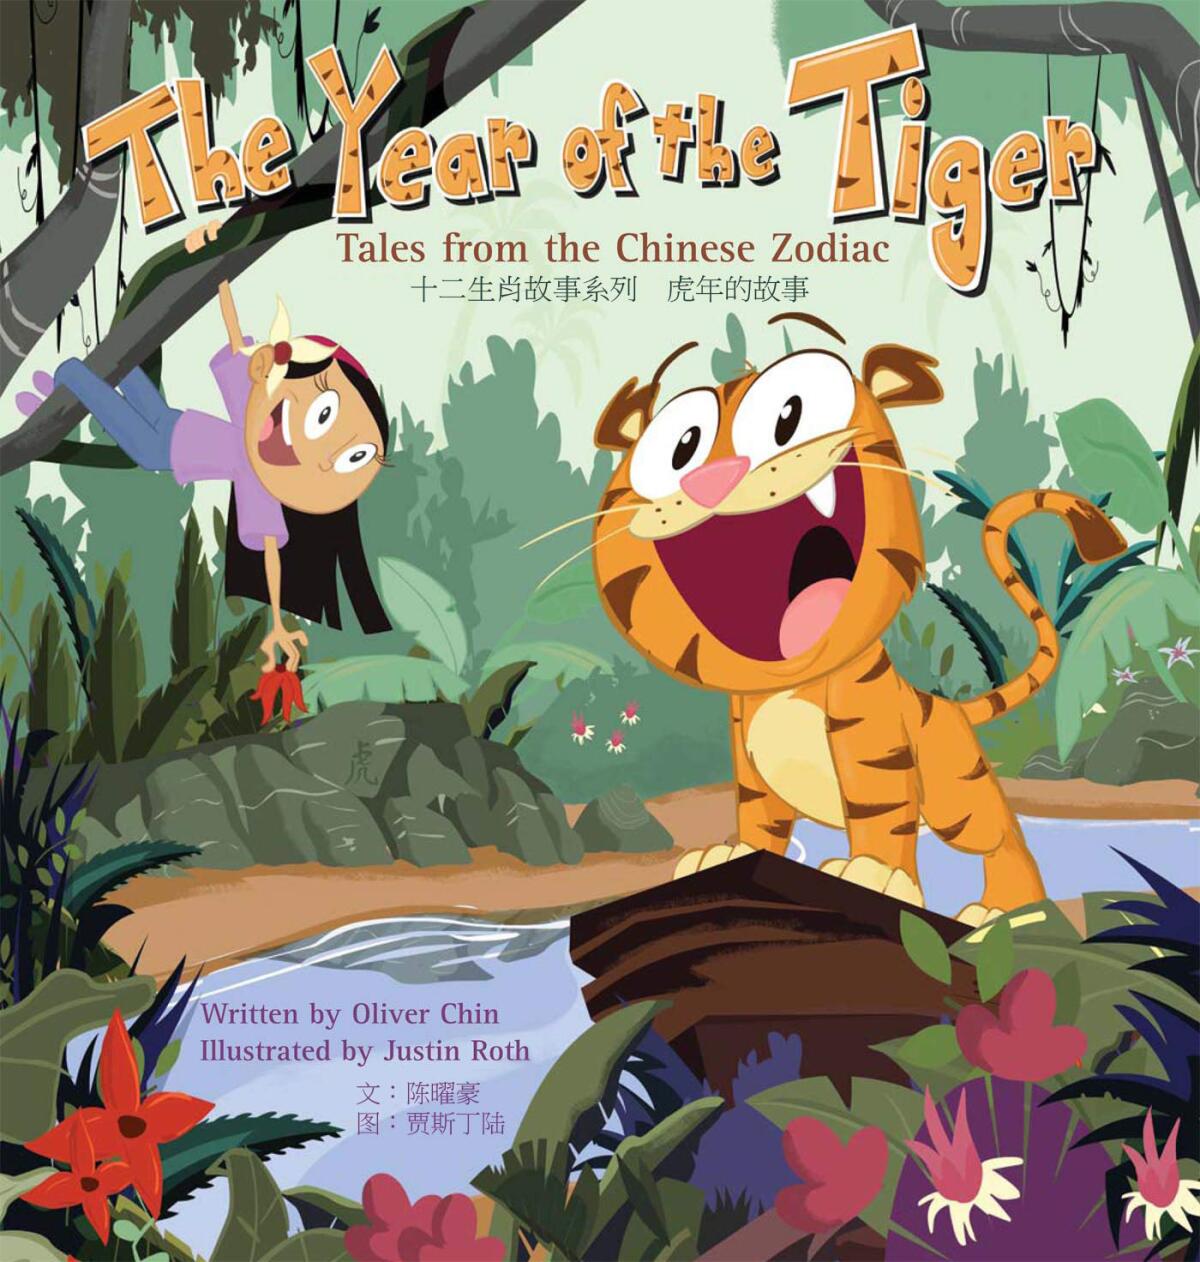 A book cover depicting a cartoon person cavorting with a cartoon tiger.